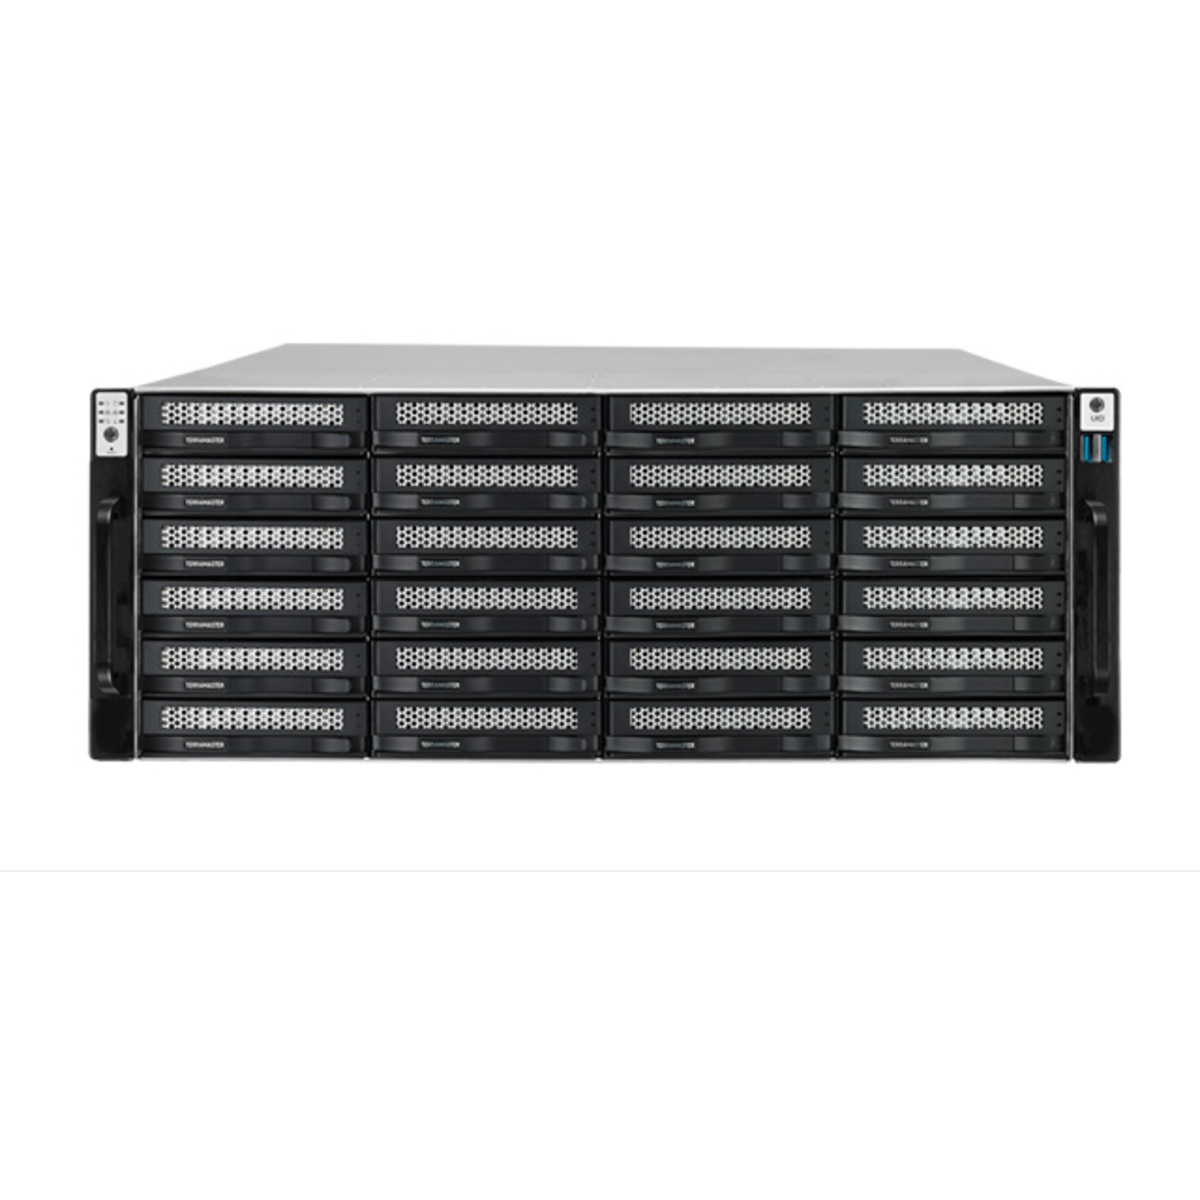 TerraMaster U24-722-2224 456tb 24-Bay RackMount Large Business / Enterprise NAS - Network Attached Storage Device 19x24tb Western Digital Red Pro WD240KFGX 3.5 7200rpm SATA 6Gb/s HDD NAS Class Drives Installed - Burn-In Tested U24-722-2224